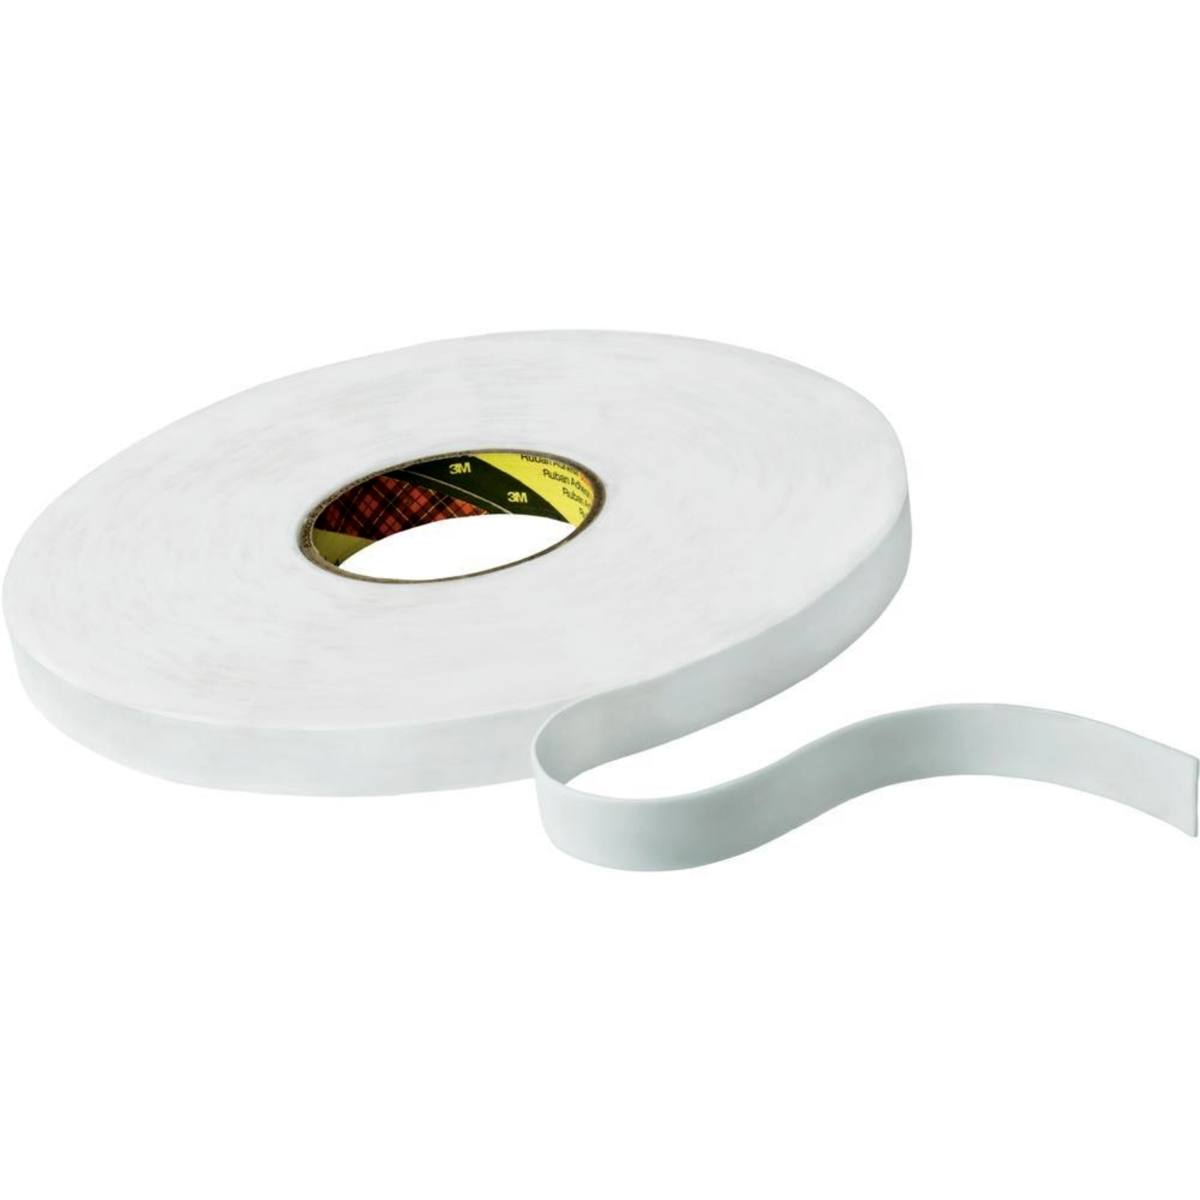 3M PE foam adhesive tape with rubber-resin adhesive 9528, white, 6 mm x 66 m, 0.8 mm